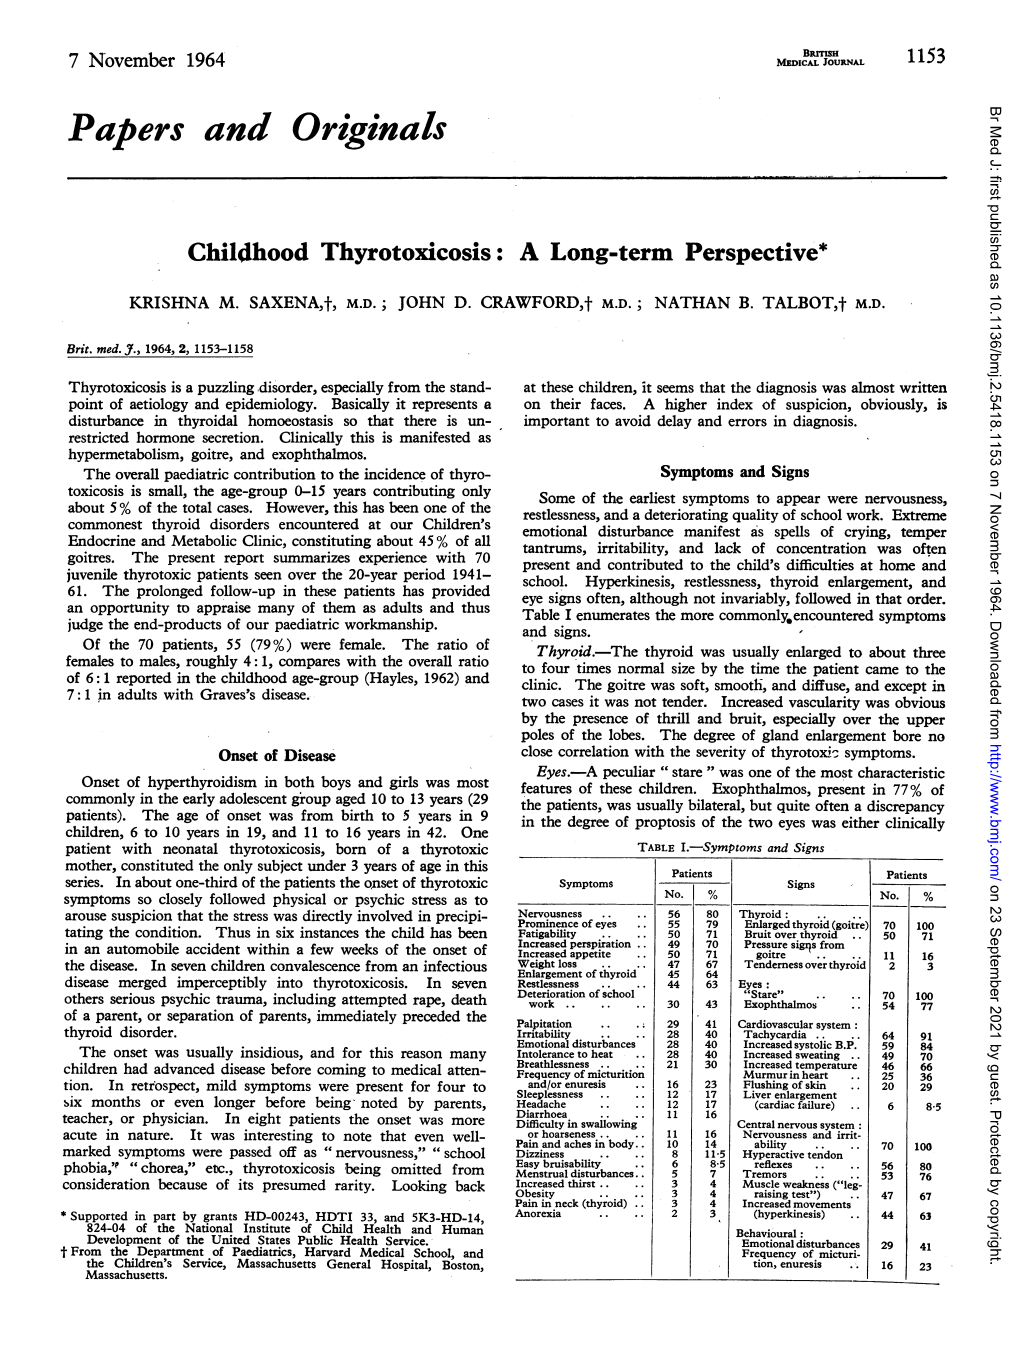 Childhood Thyrotoxicosis: a Long-Term Perspective*